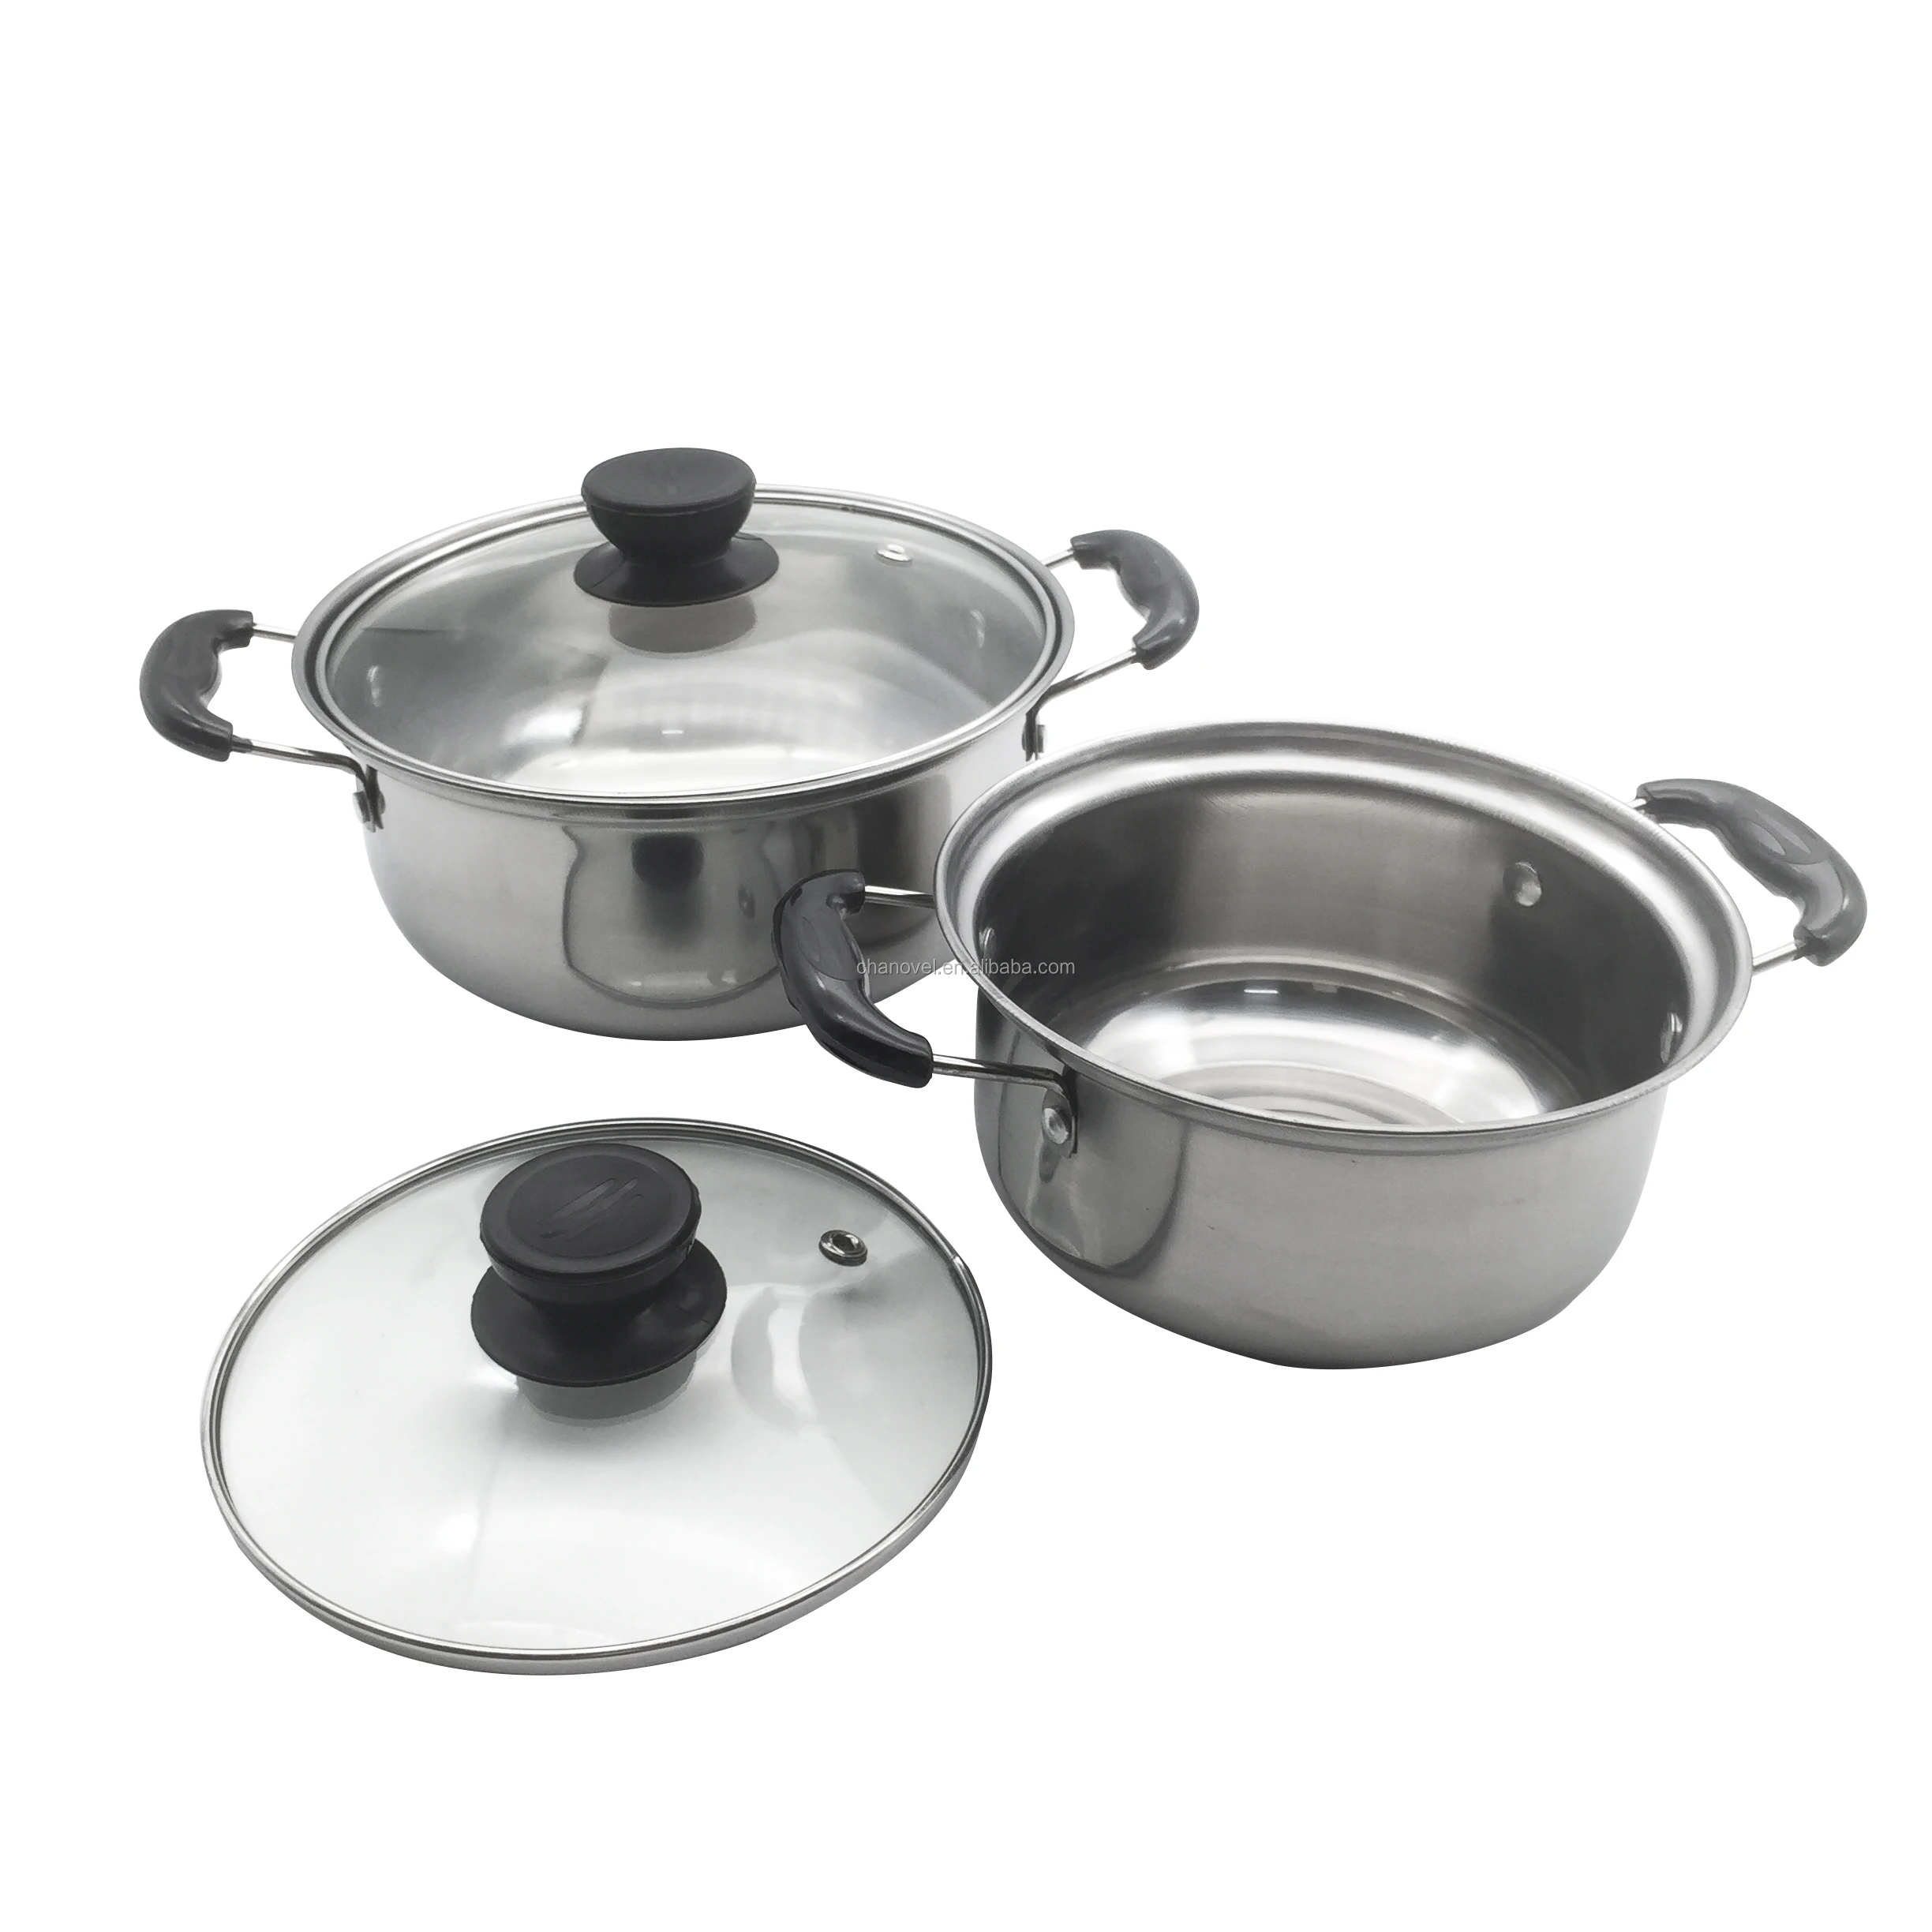 Details about   STAINLESS STEEL COOKWARE 5PC HOB STOCKPOT POT CASSEROLE SET WITH GLASS LIDS 